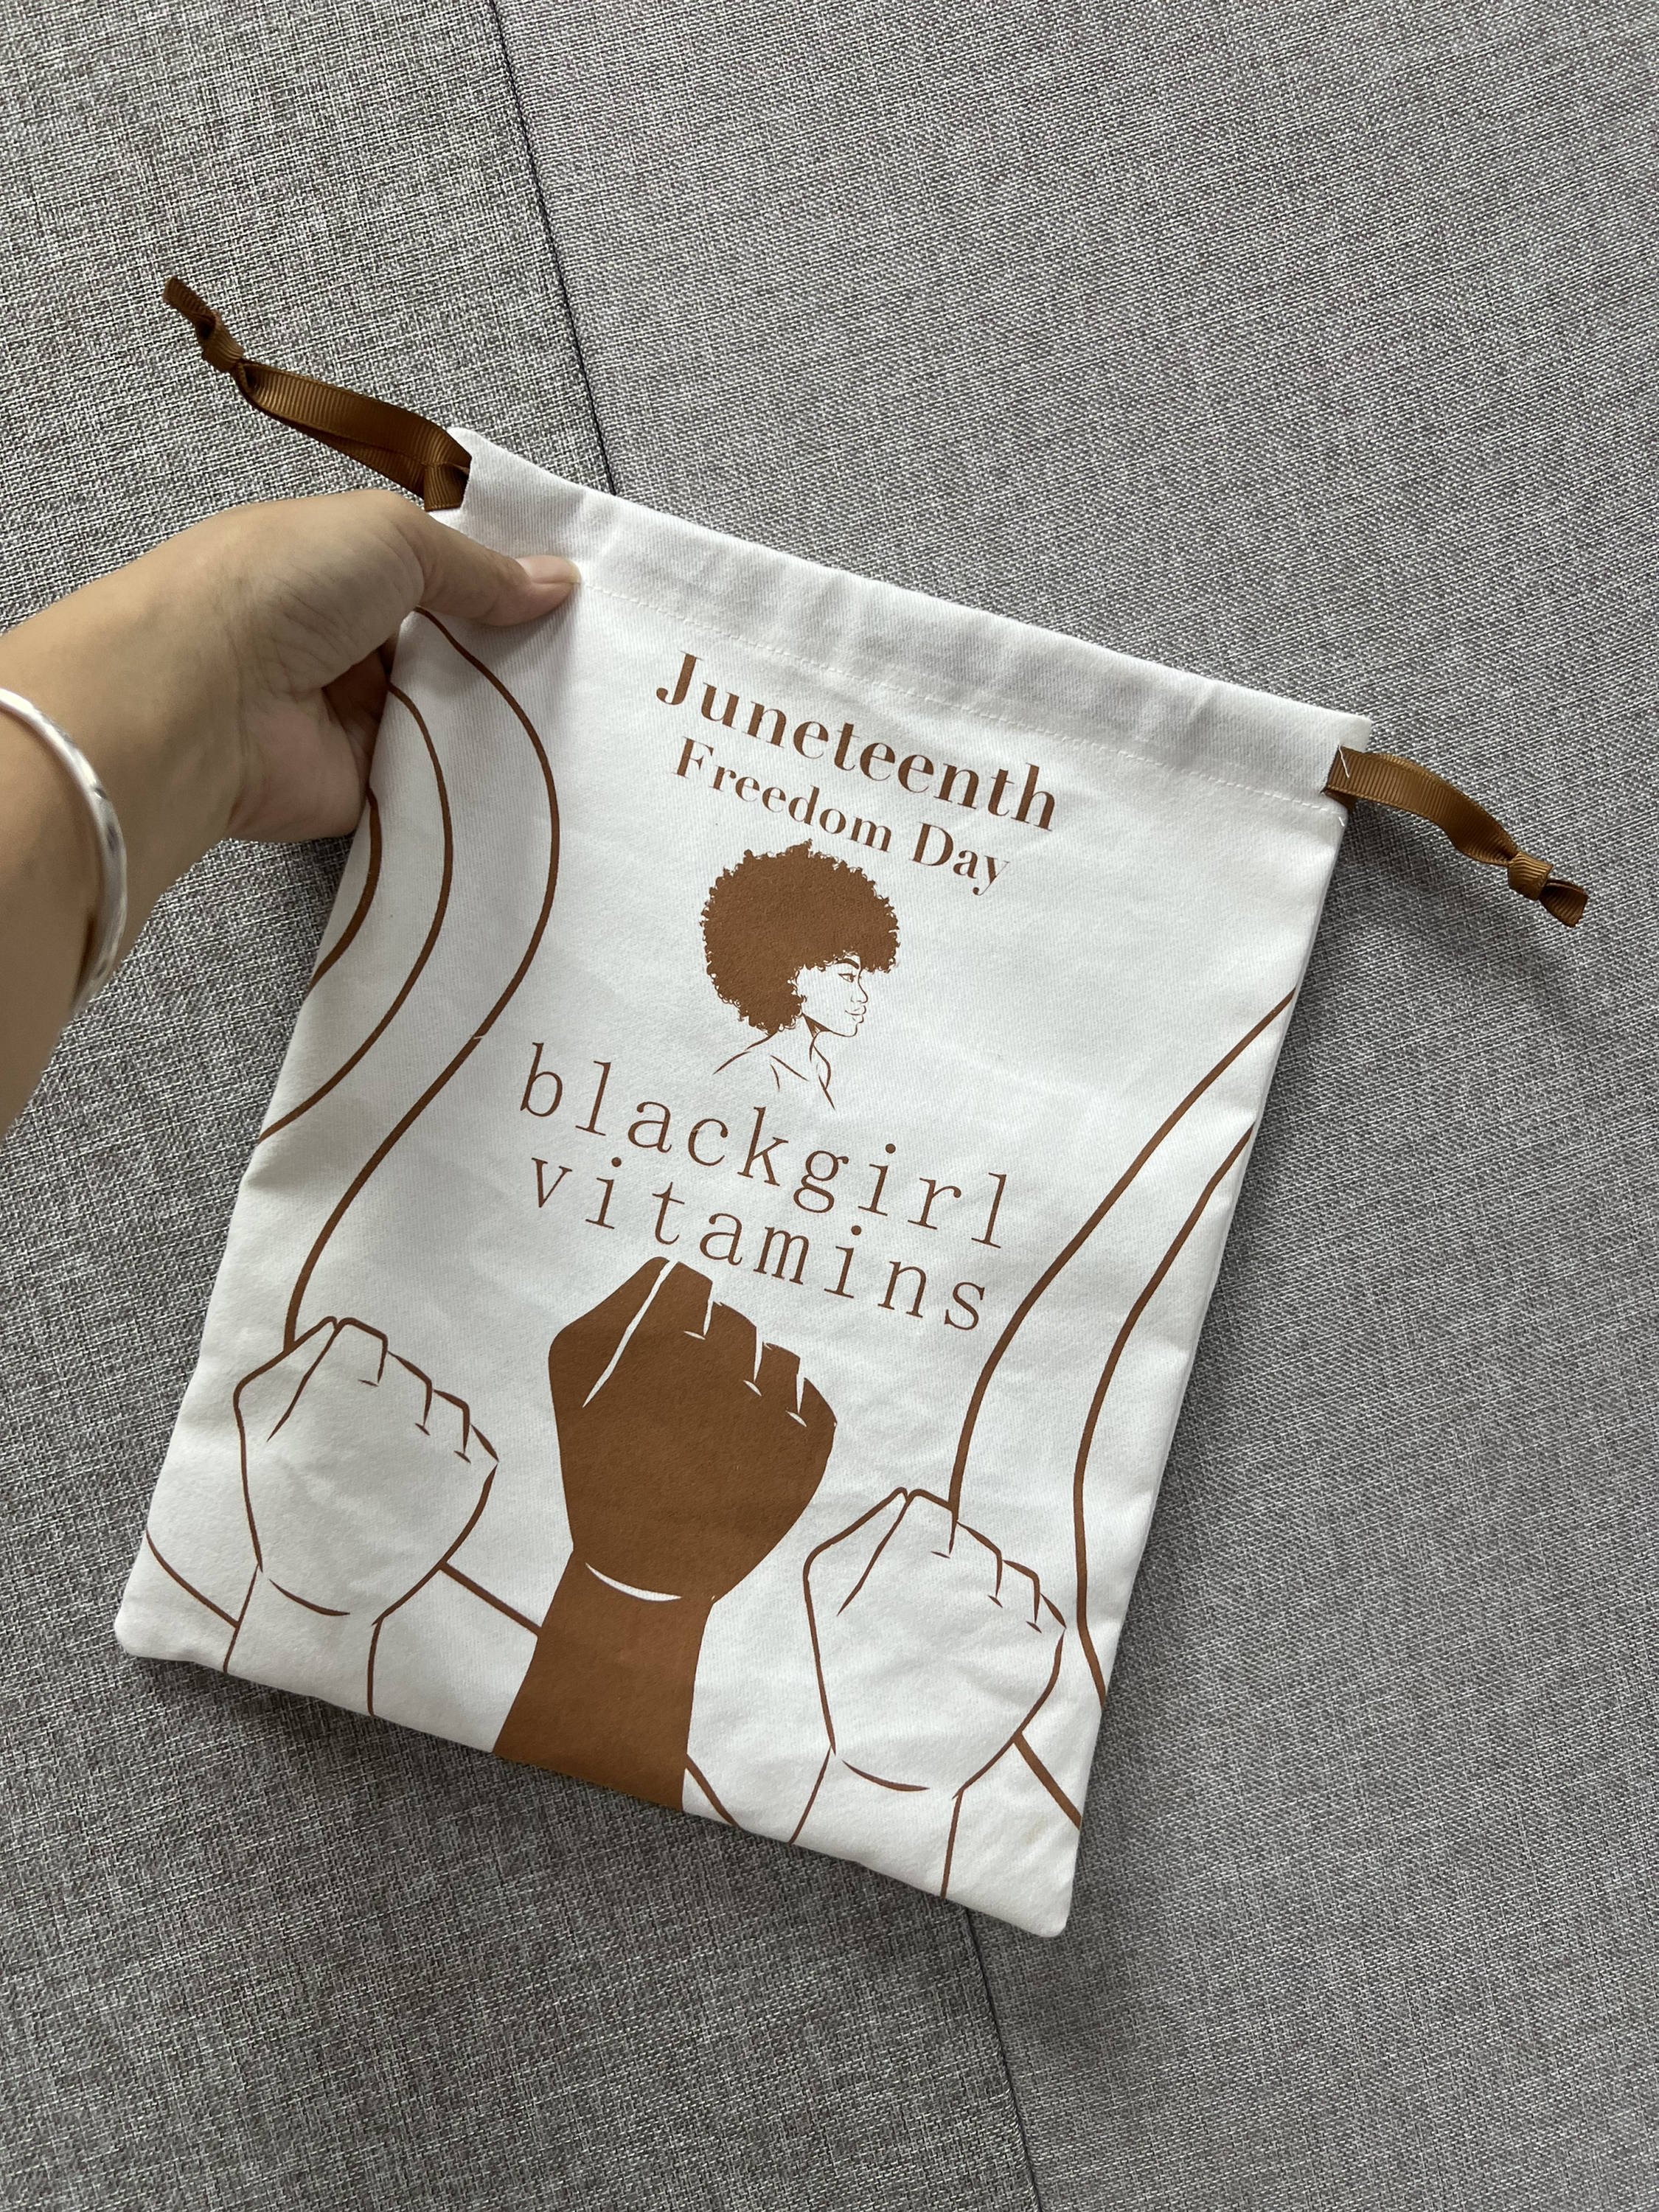 Black Girl Vitamins Celebrates Juneteenth with Another Powerful Collaboration, Ensuring Black Women Are Healthy and Remain the Fabric of Communities